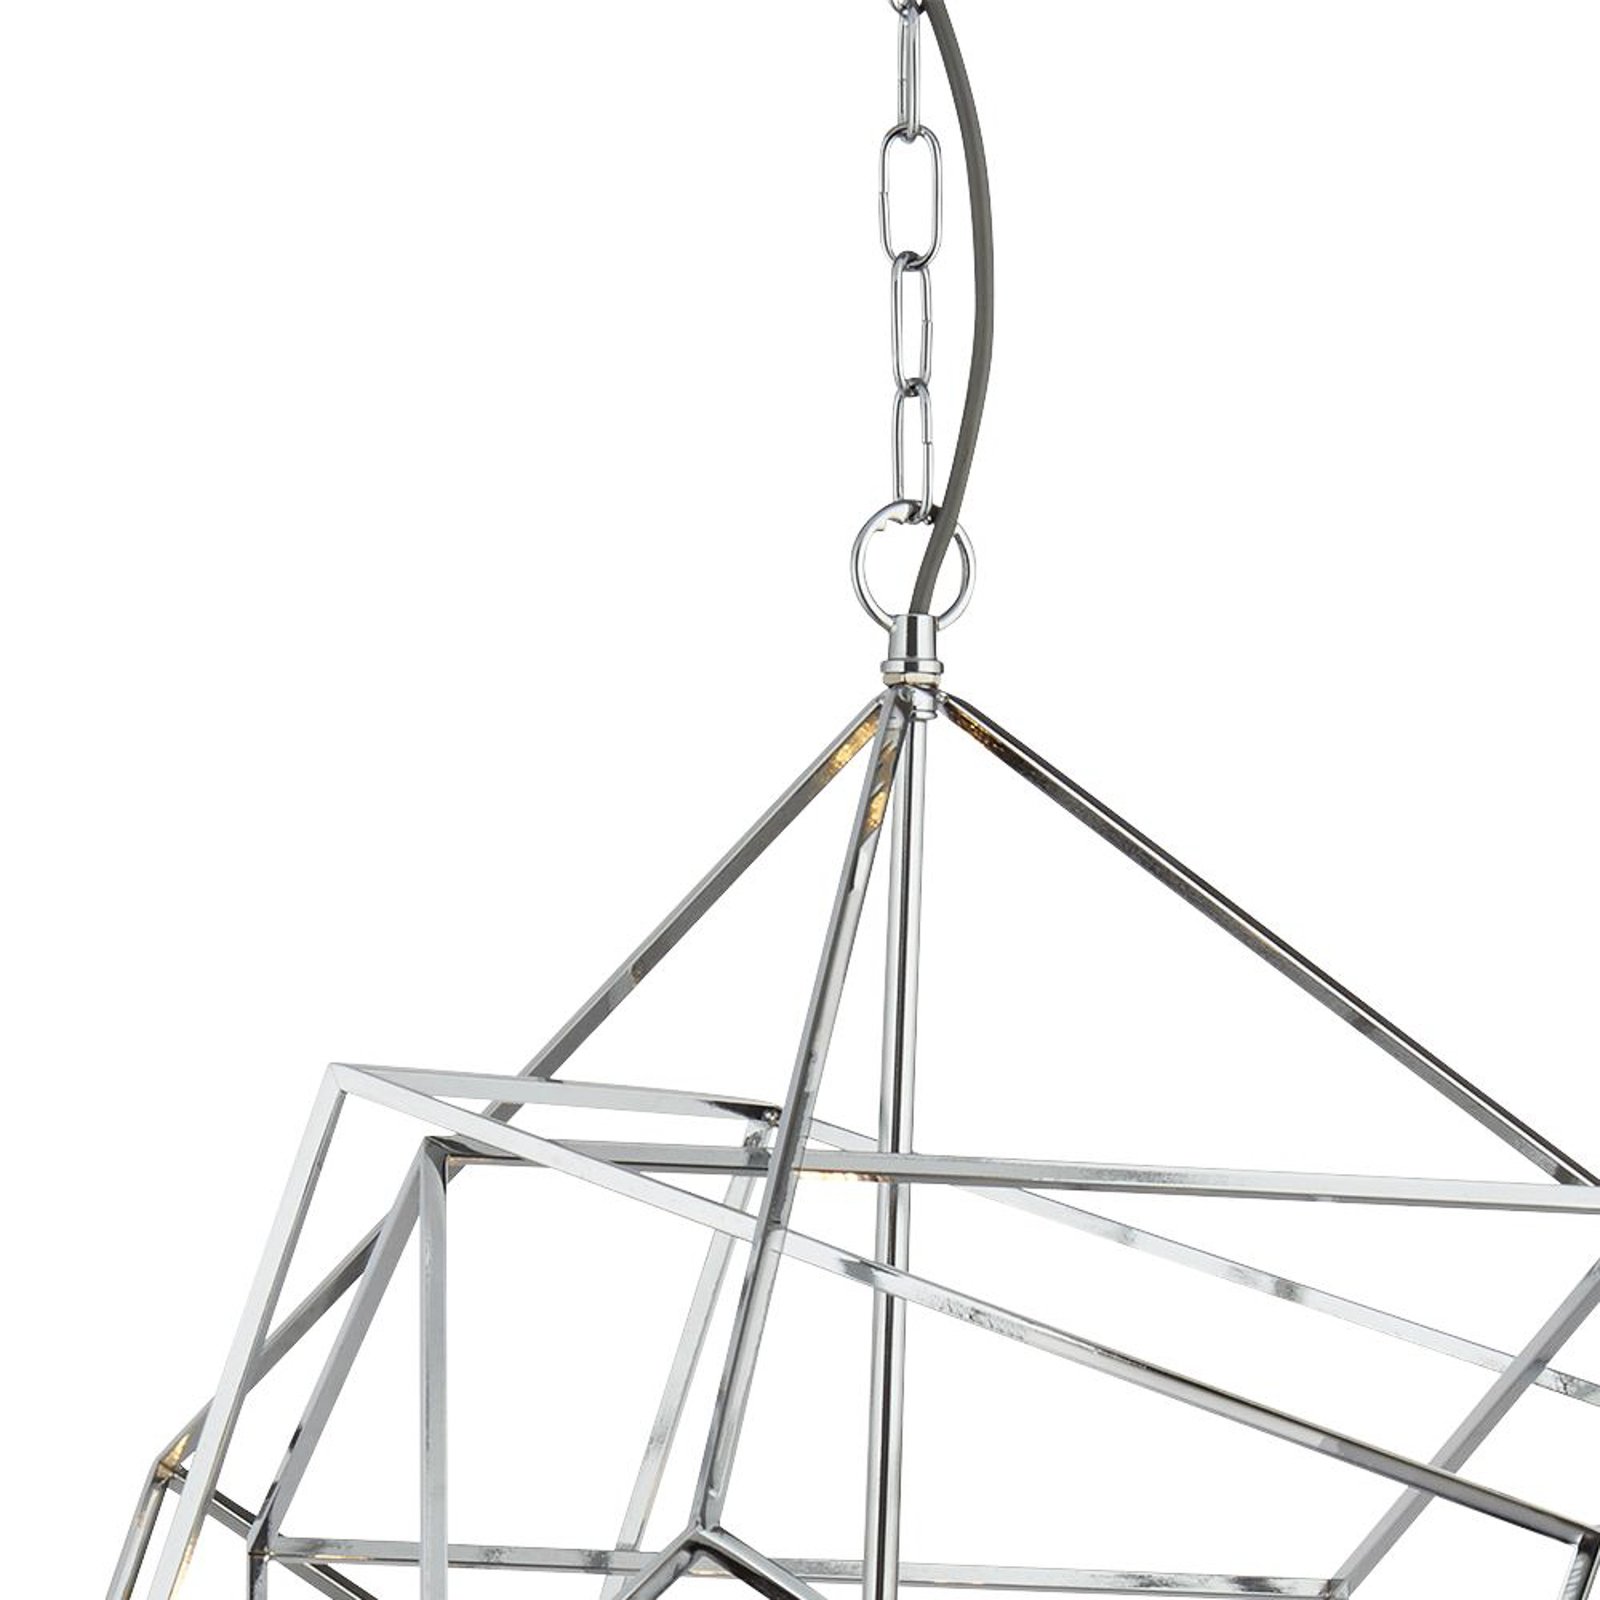 Cube pendant light cage lampshade